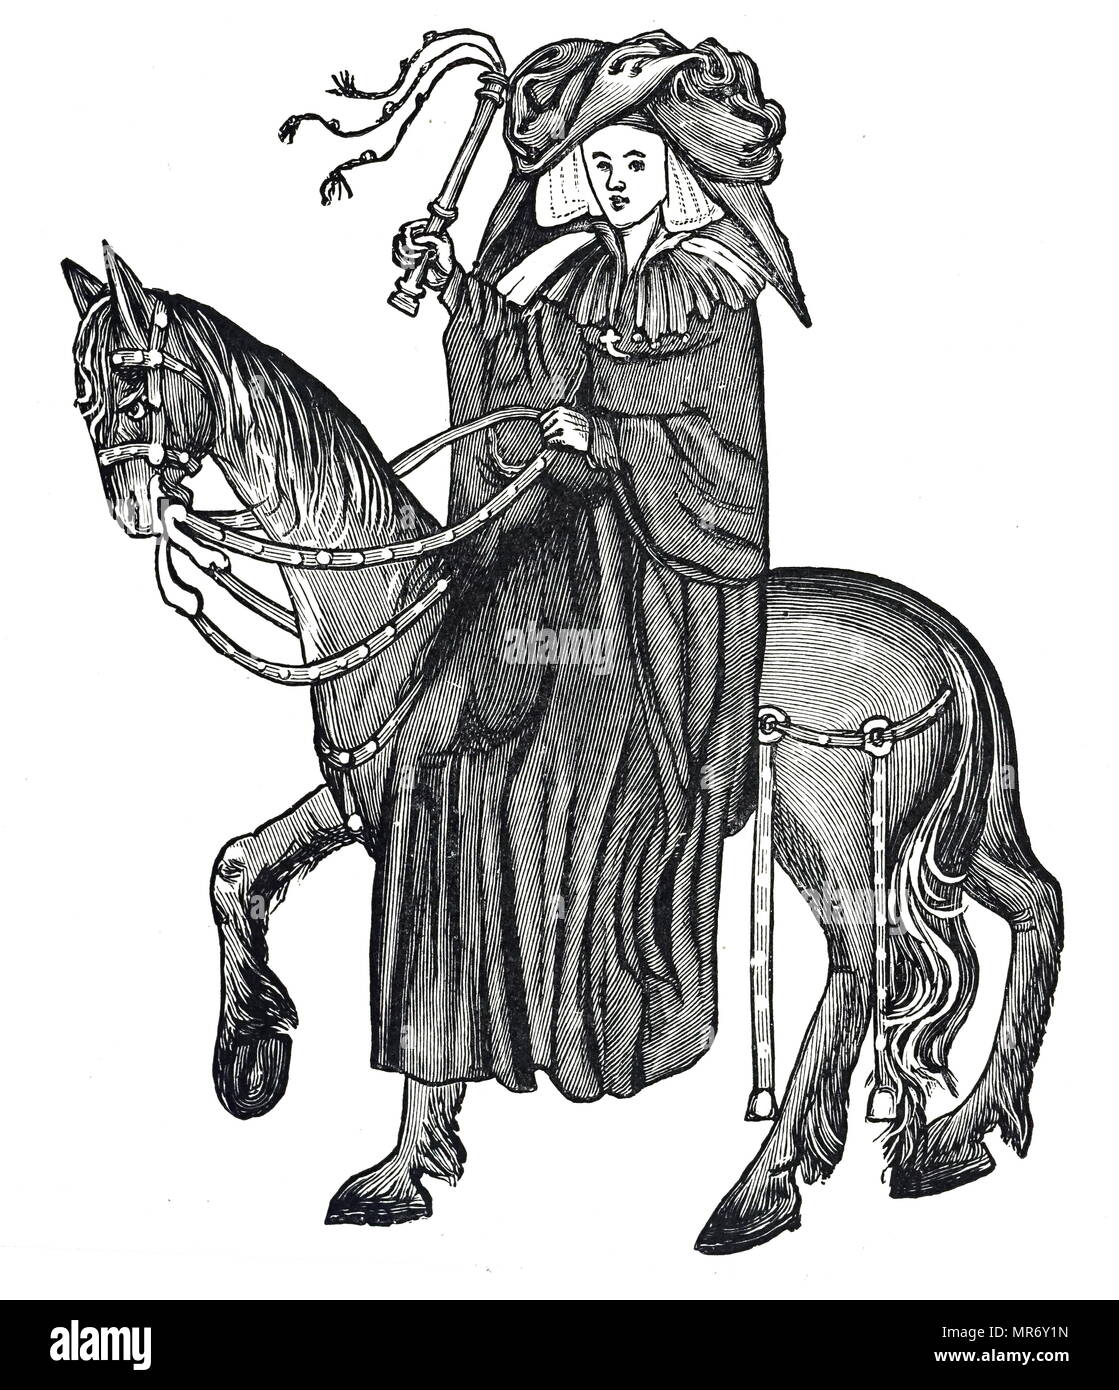 Illustration from Geoffrey Chaucer's 'The Wife of Bath's Tale', from the Canterbury Tales. Geoffrey Chaucer, an English poet of the Middle Ages. Dated 15th century Stock Photo